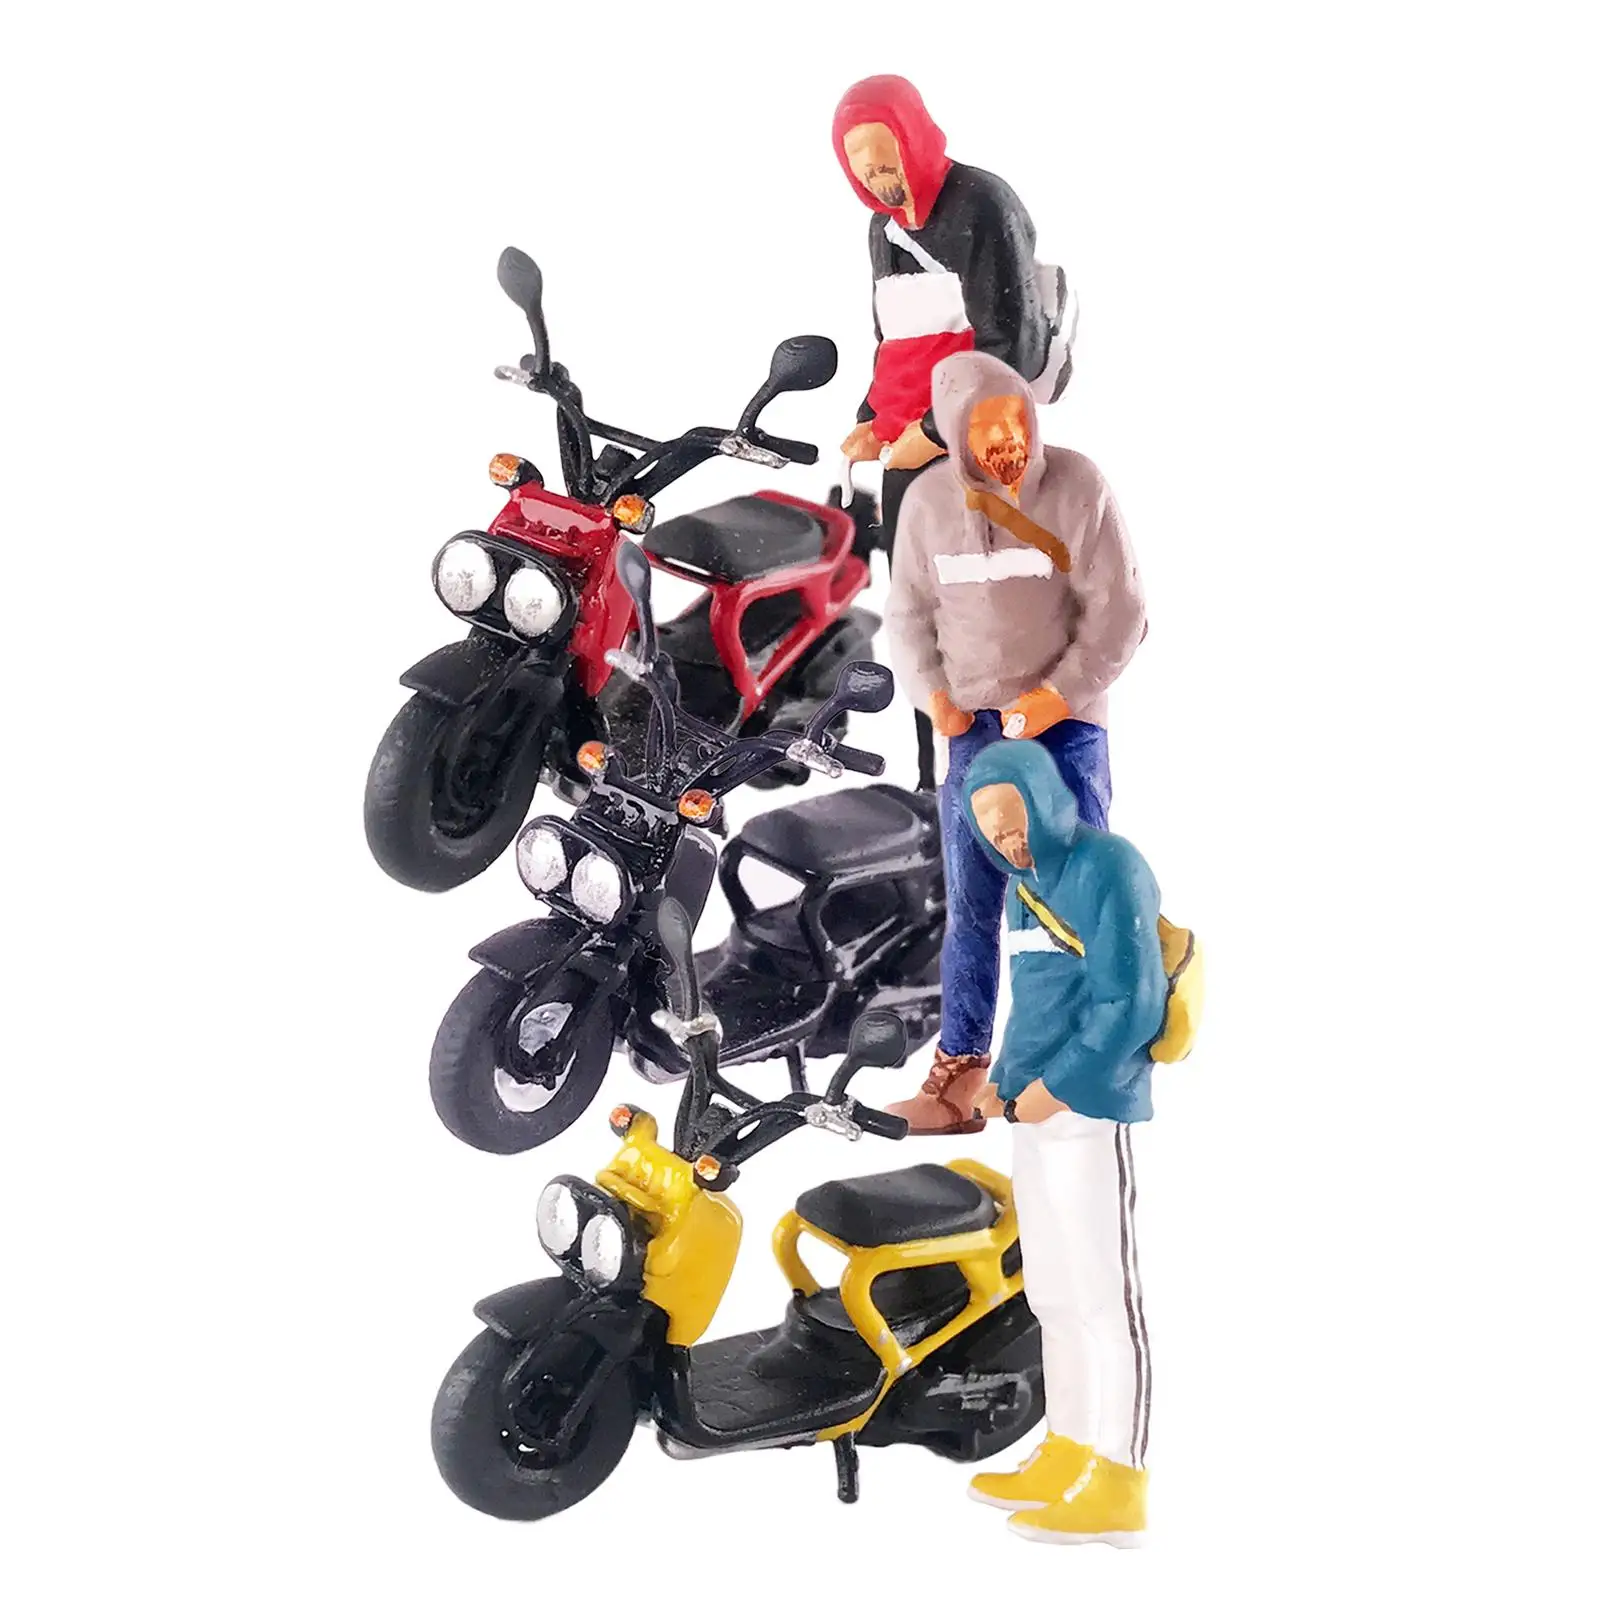 1/64 Male Figure Driving Motorcycle Tiny People Building Kit Layout S Scale